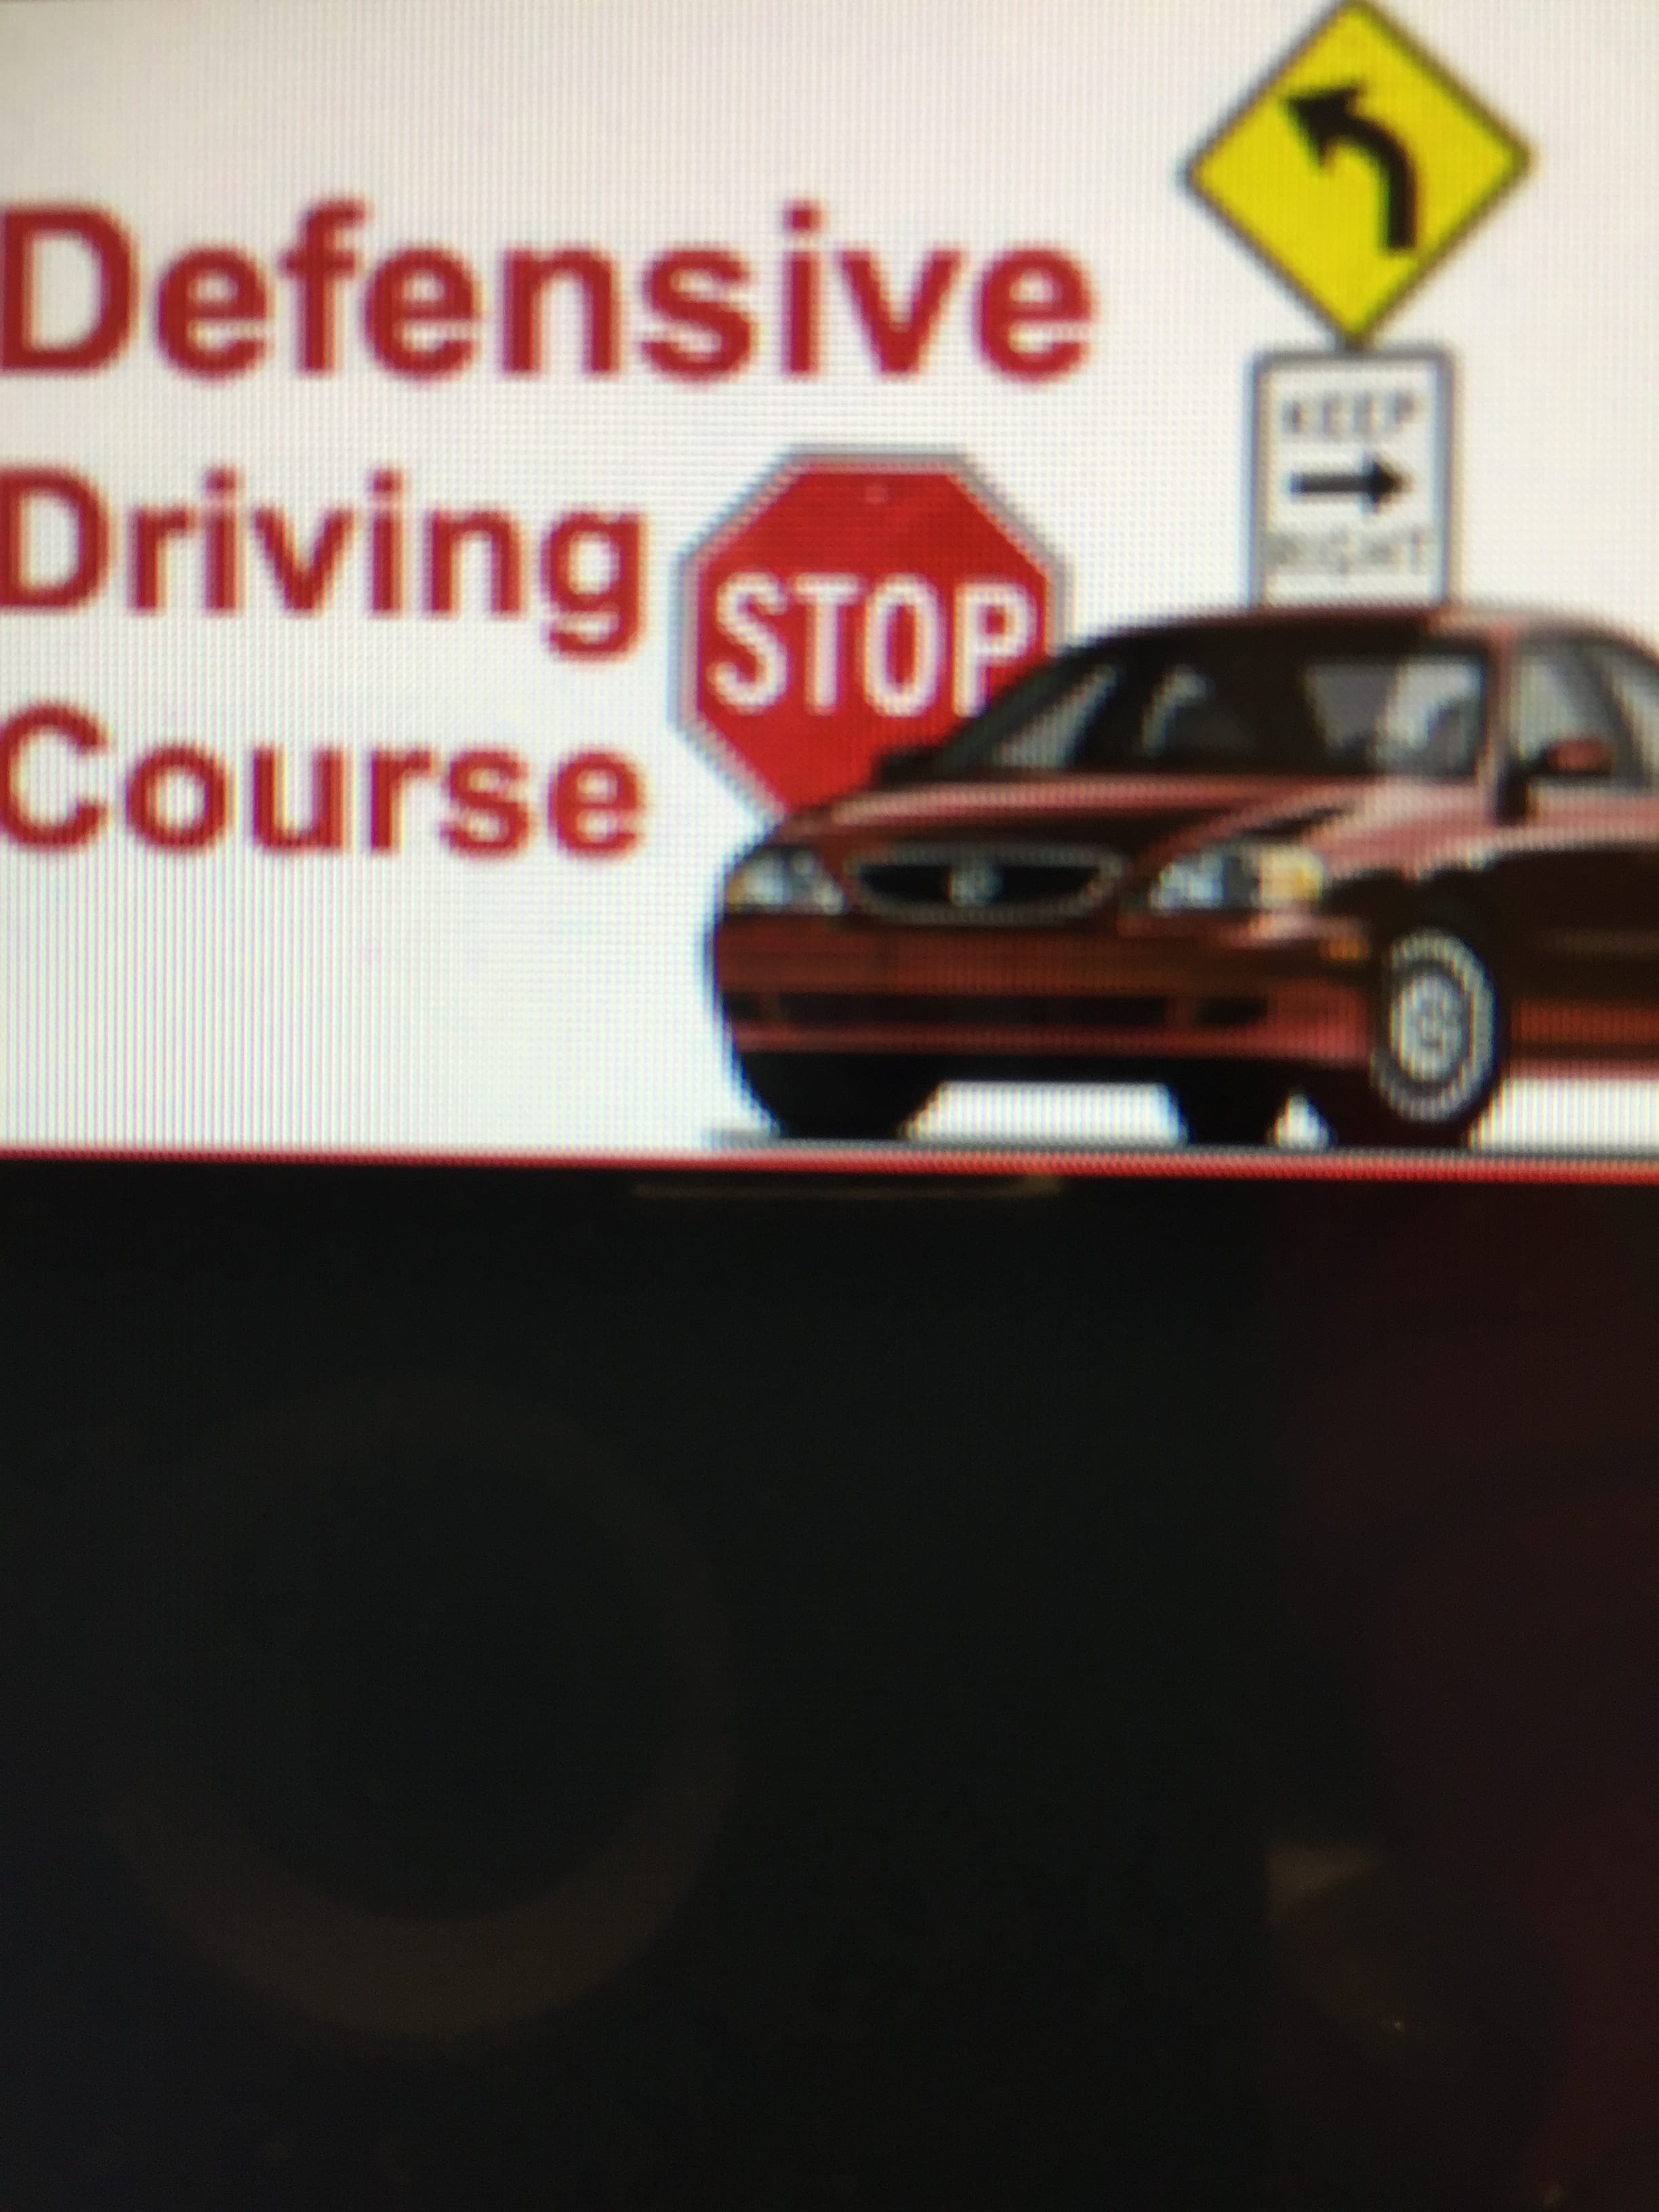 Driver Safety Course